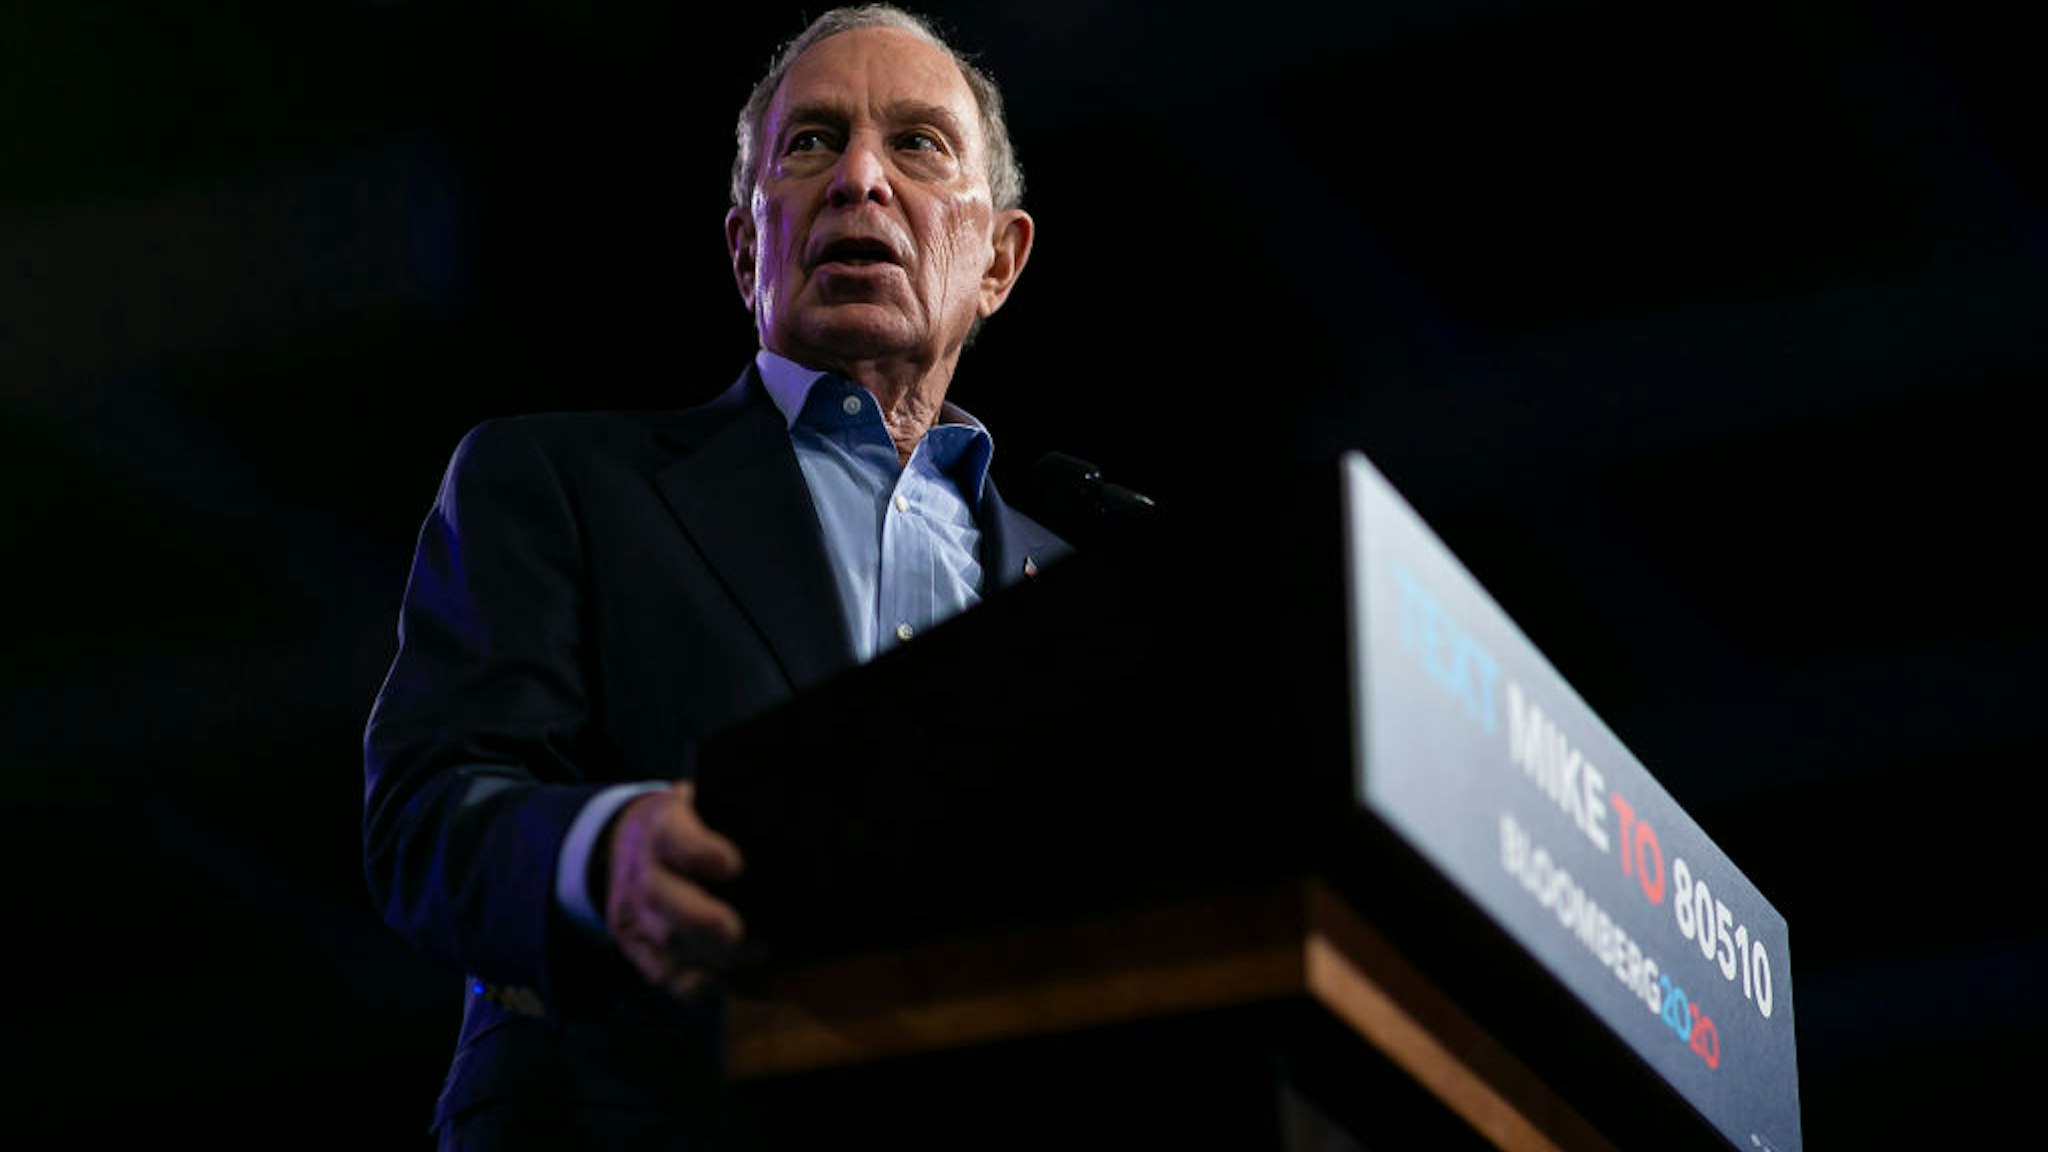 Democratic presidential candidate Mike Bloomberg speaks during a campaign rally at the Palm Beach County Convention Center in West Palm Beach, Fla., on Tuesday, March 3, 2020.